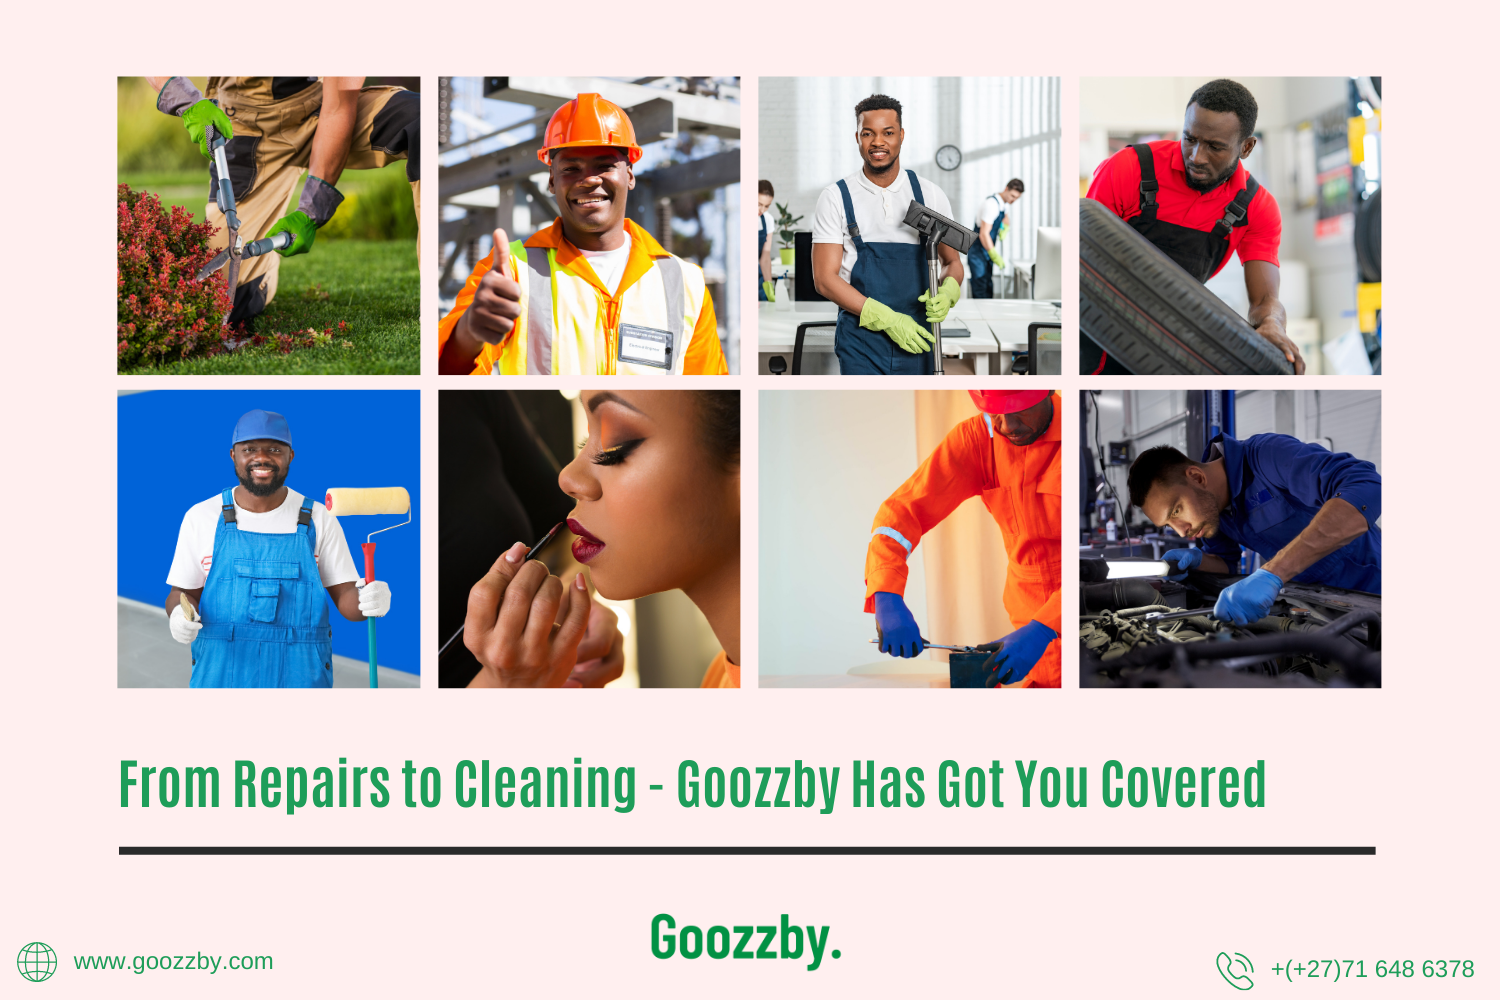 From Repairs to Cleaning - Goozzby Has Got You Covered

Goozzby.

Q +(+27)71 648 6378